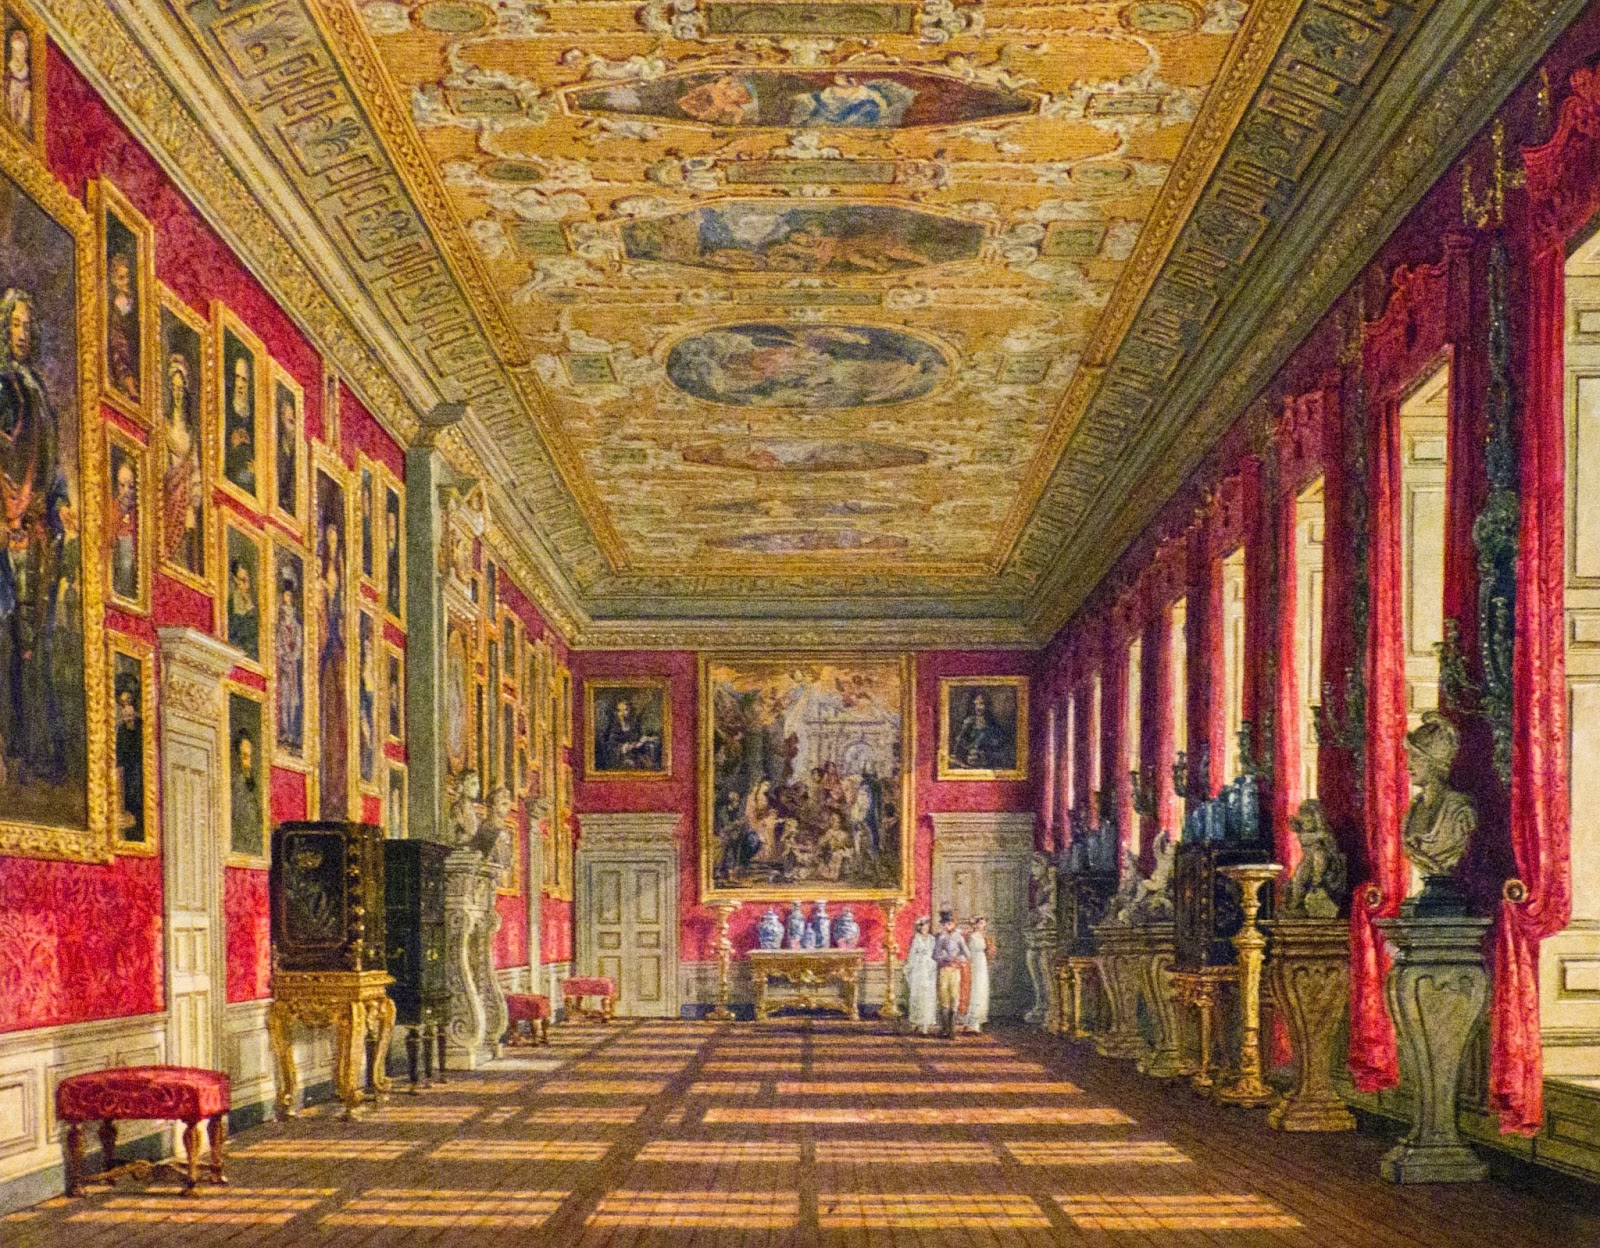 The King's Gallery, Kensington Palace by Charles Wild (c1816)